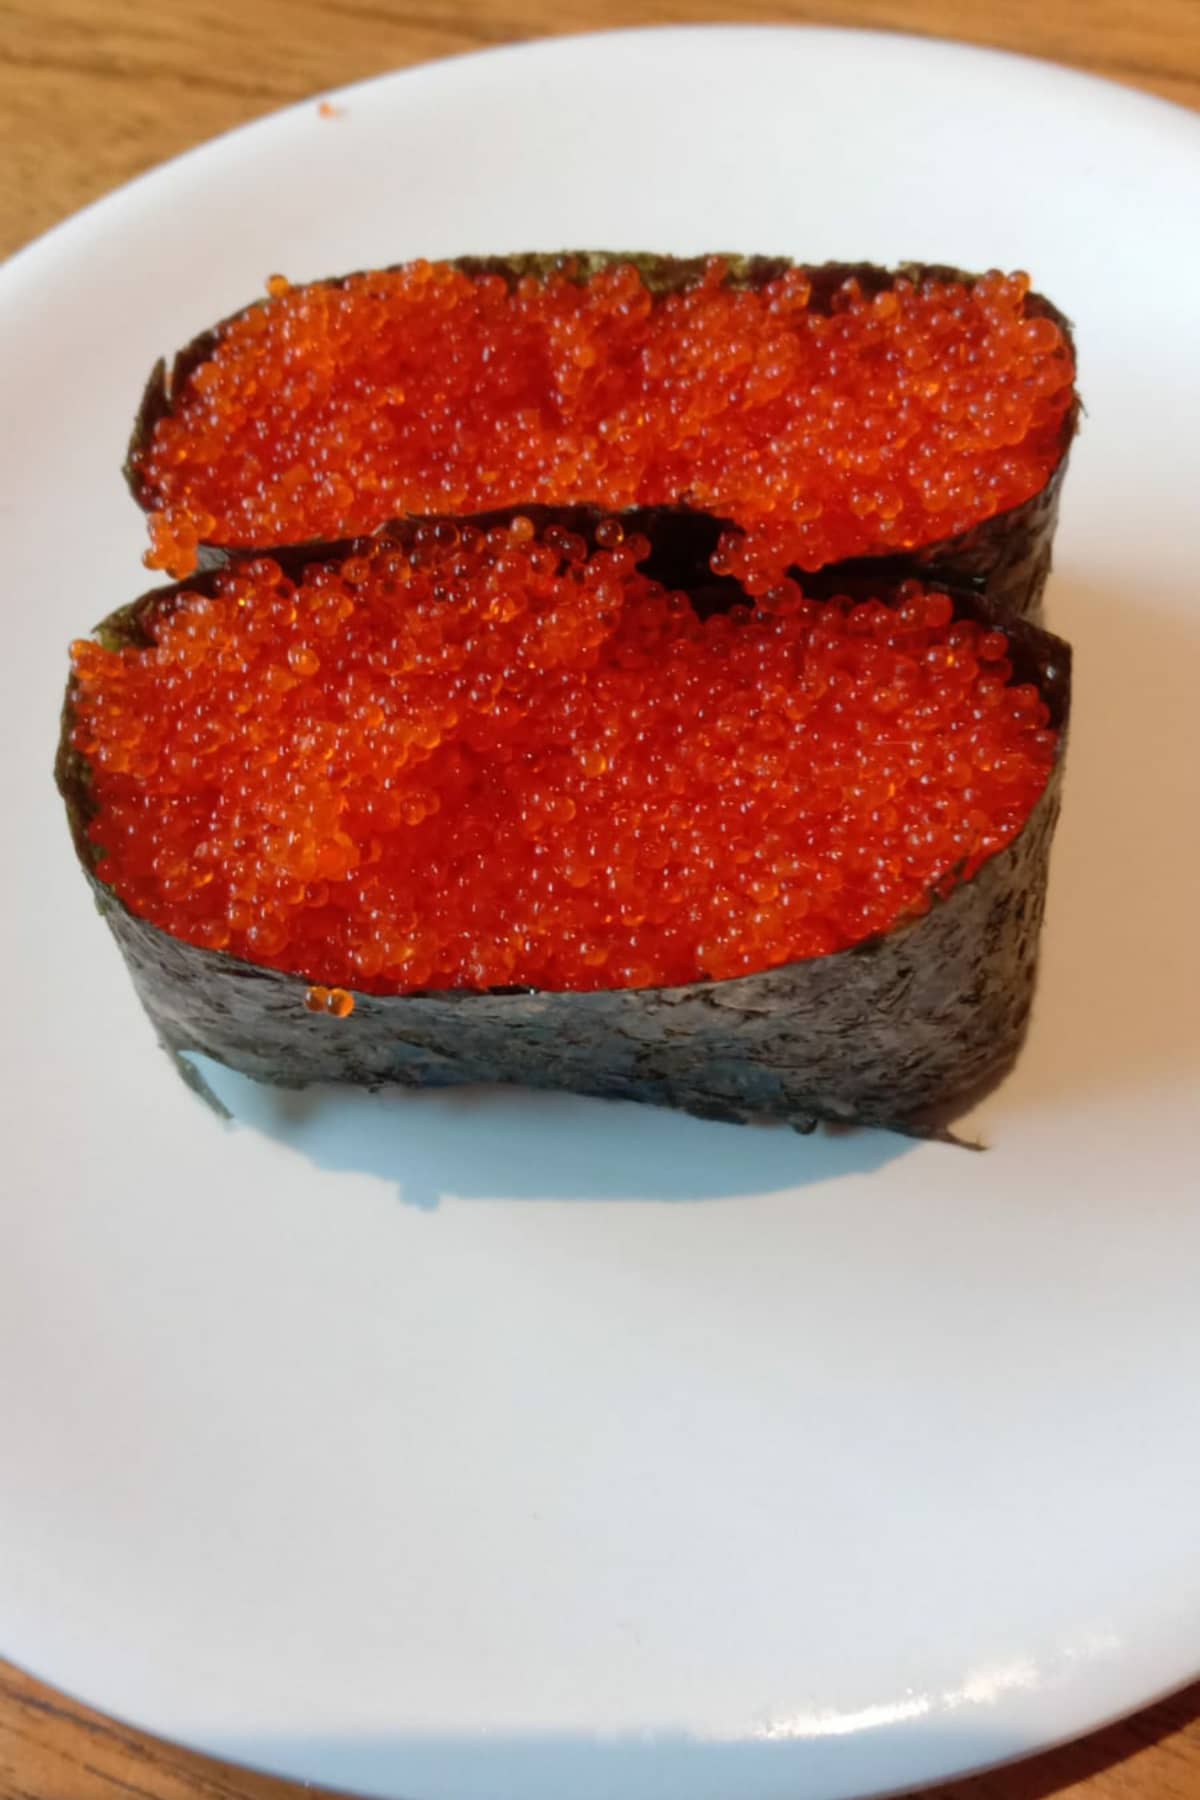 What Are The Different Kinds Of Fish Eggs In Japanese Cuisine?